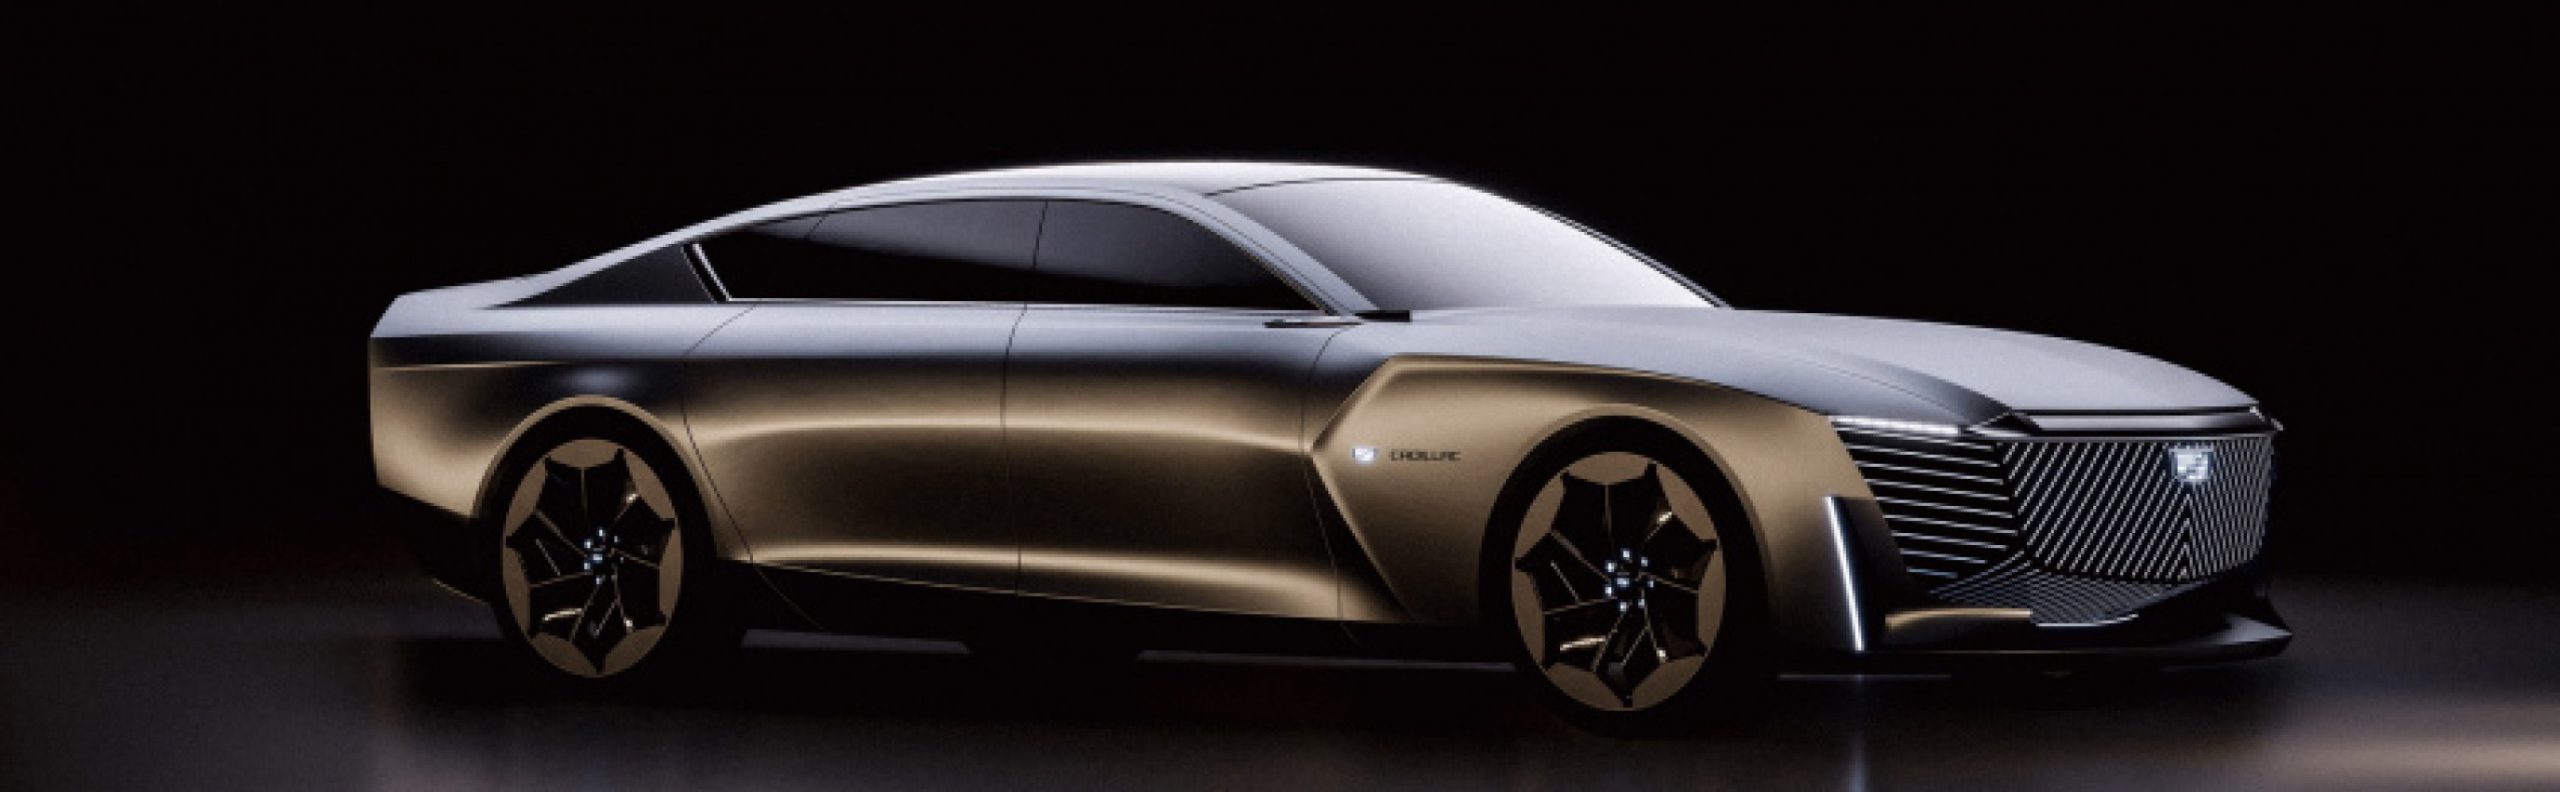 autos, cadillac, cars, news, cadillac concepts, concepts, renderings, the cadillac lumin is an unofficial design study for a flagship electric sedan